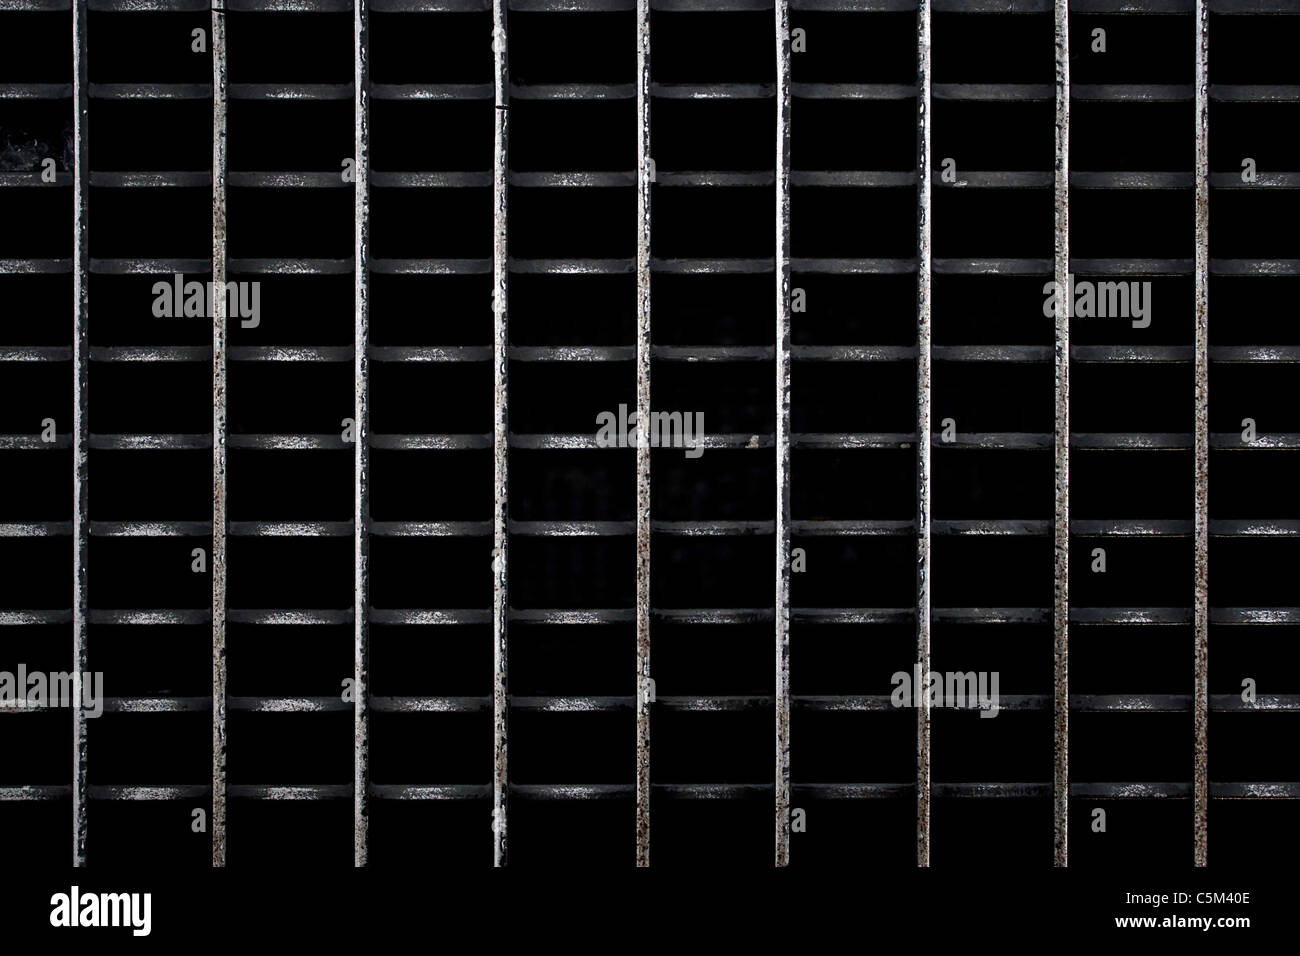 A metal subway grate texture that is worn and weathered. Stock Photo